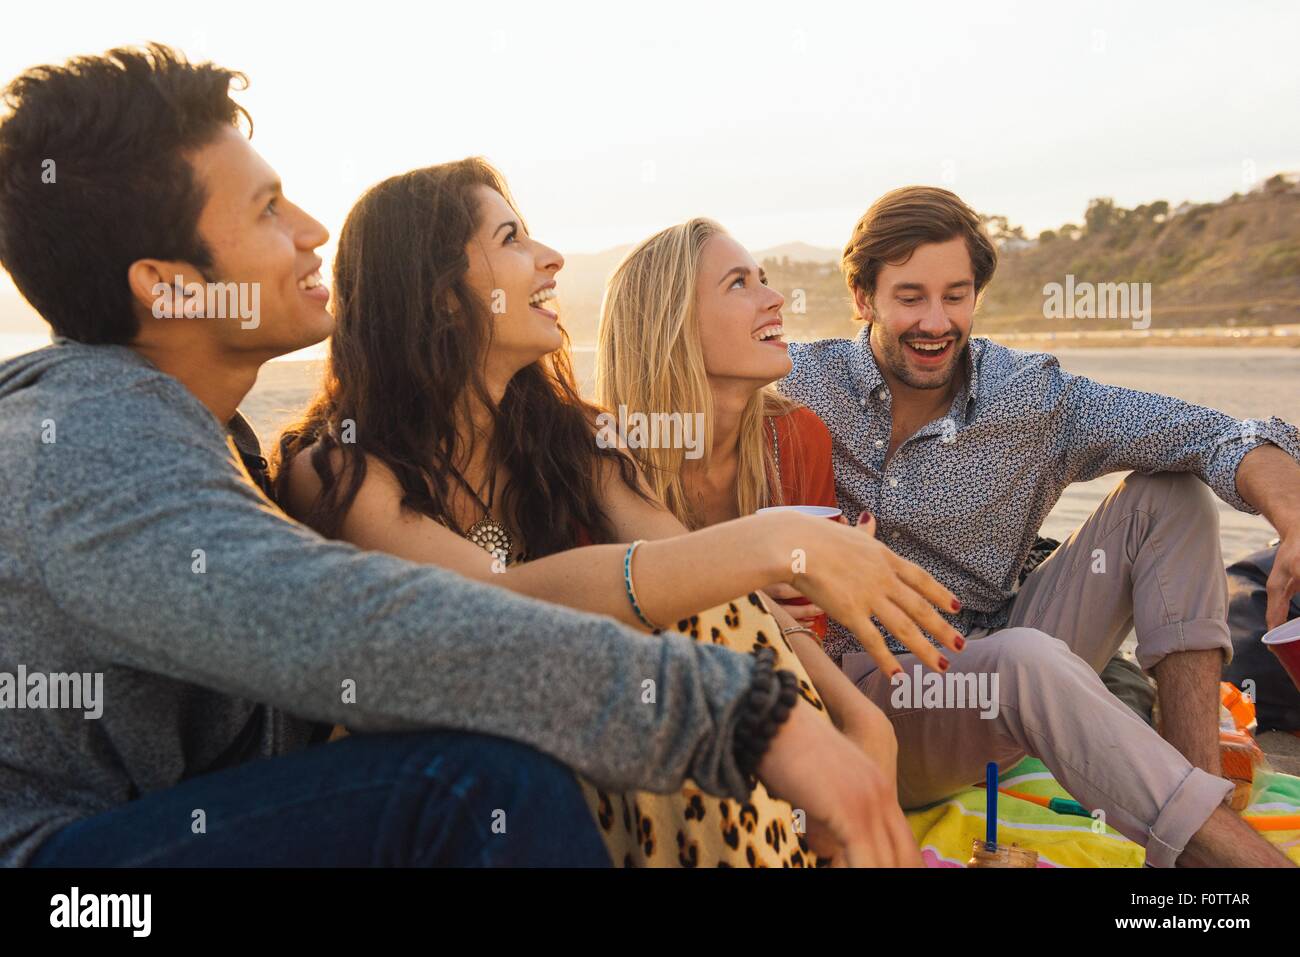 Group of friends sitting on beach Banque D'Images